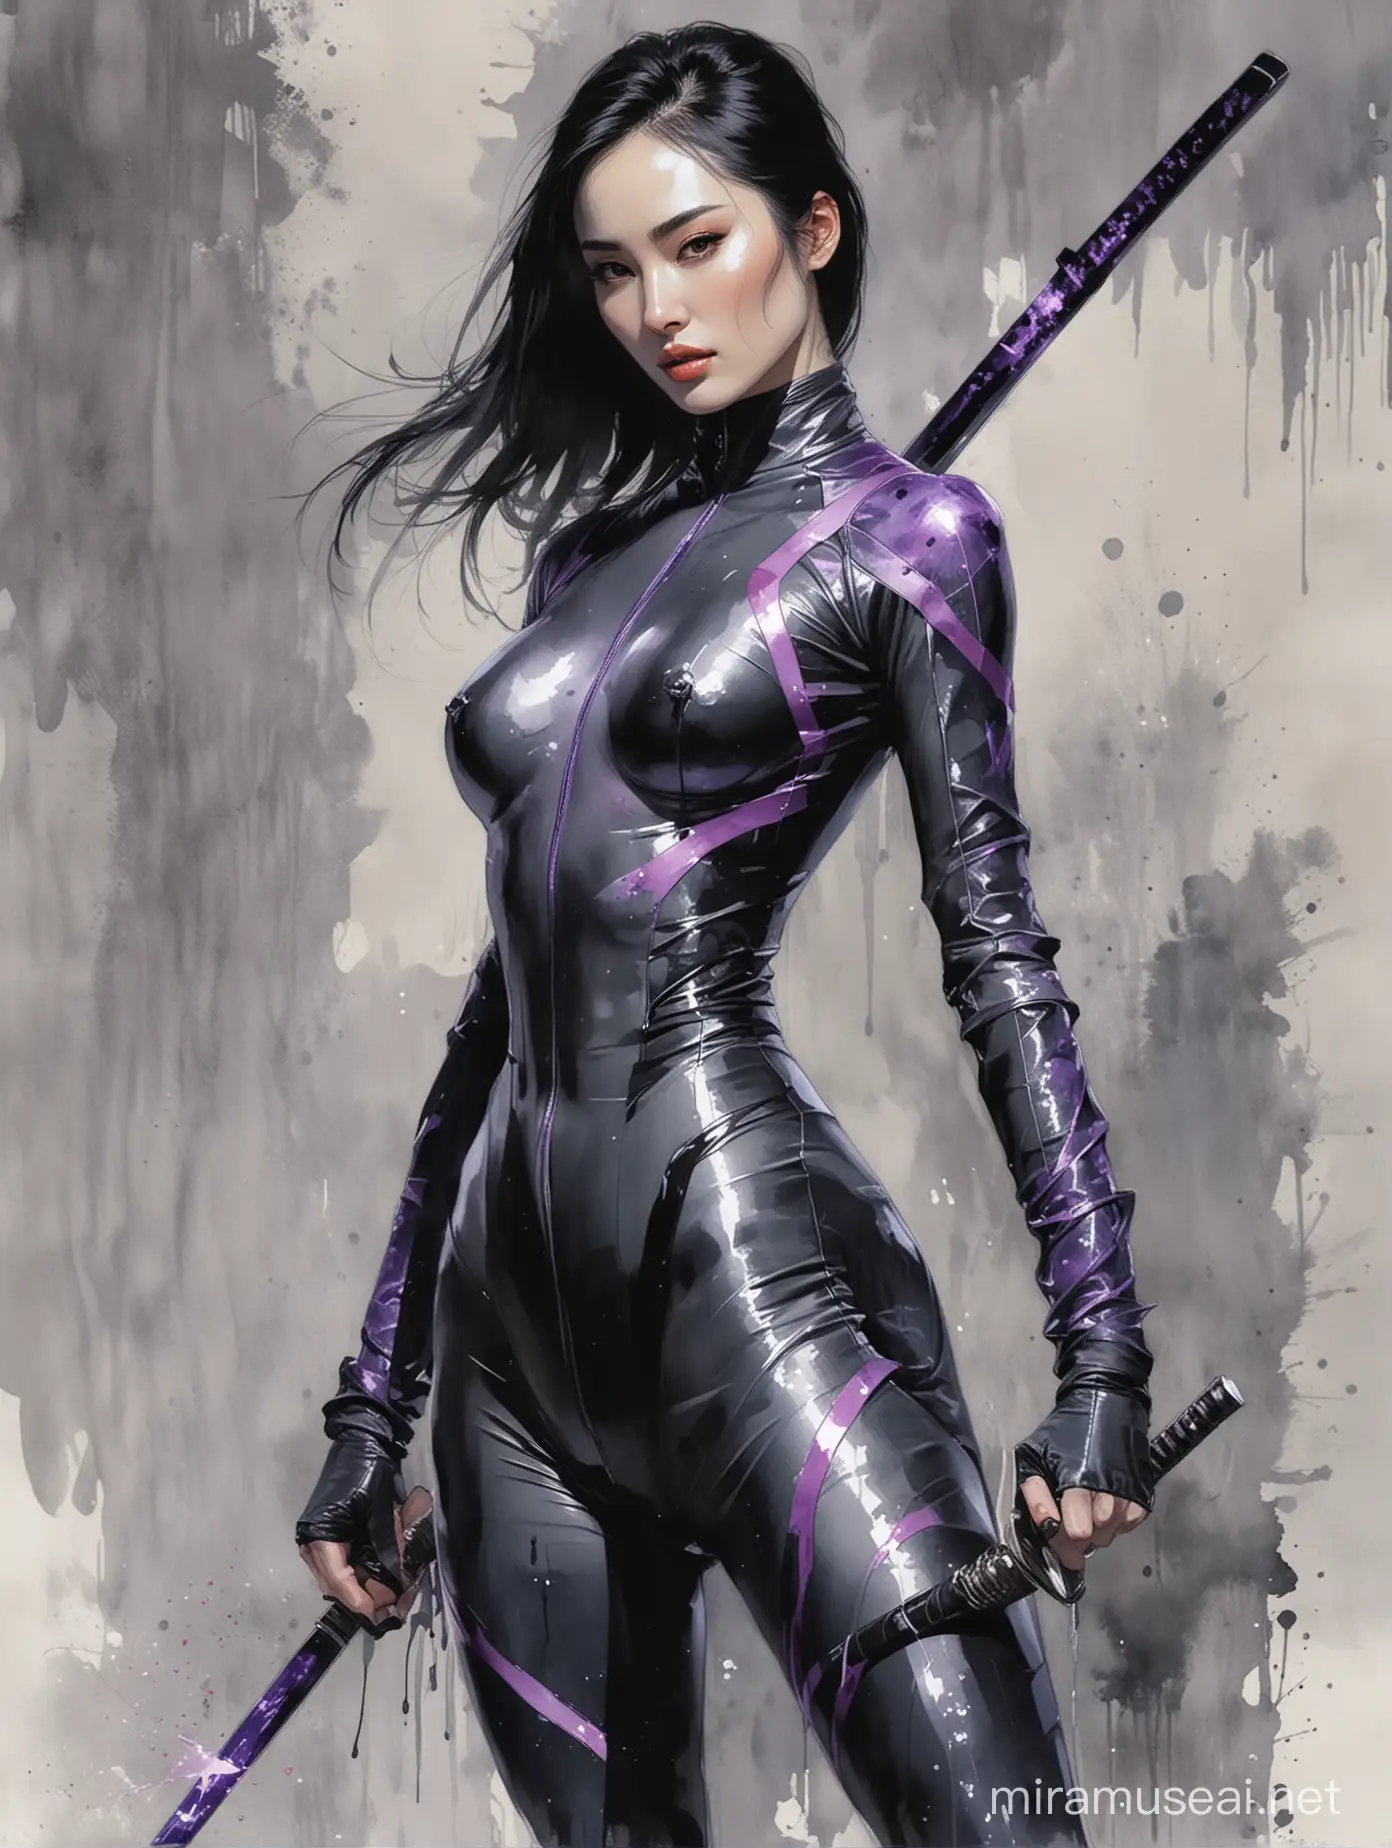 Alex Maleev's illustration depicting black-haired very pale alluring muscular well-built Yang Mi wearing high-neck catsuit holding a katana with purple electricity, smooth shiny thigh, watercolor, no makeup, no distortion, gray palette, insanely high detail, very high quality